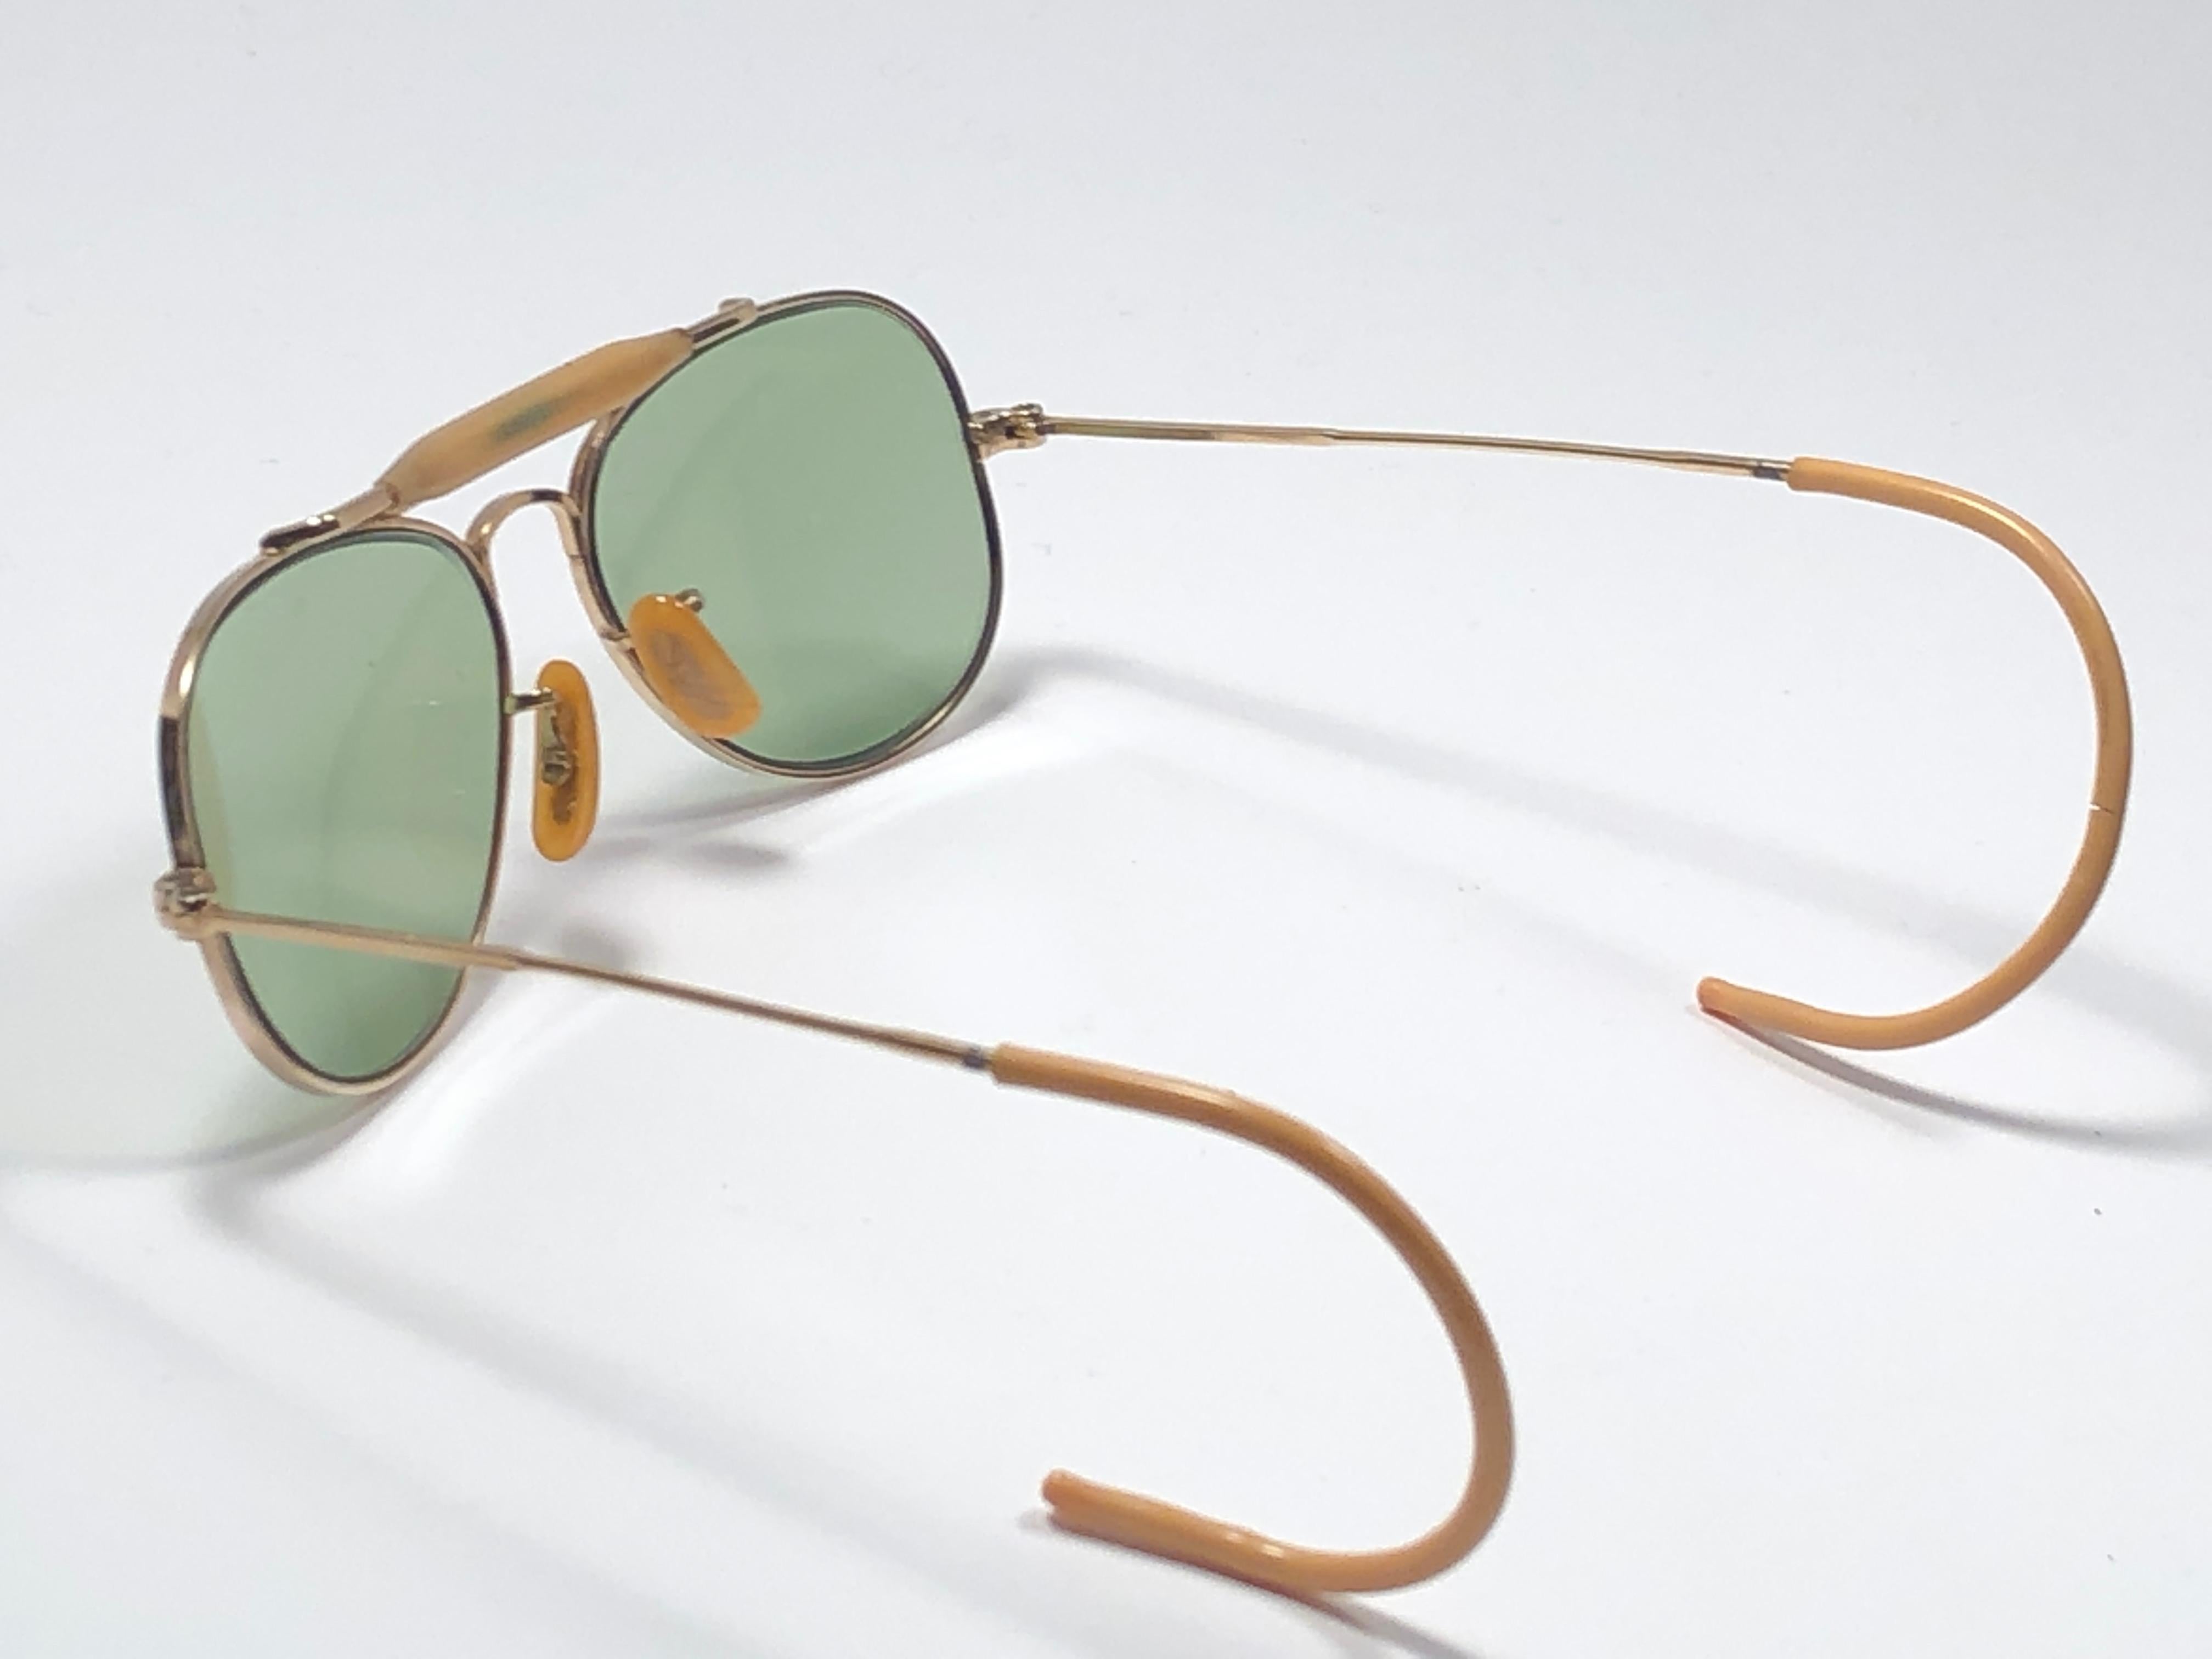 Rare Vintage 1940 Ray Ban Oudoorsman Smallest Size 12K Gold Filled Sunglasses In Excellent Condition For Sale In Baleares, Baleares